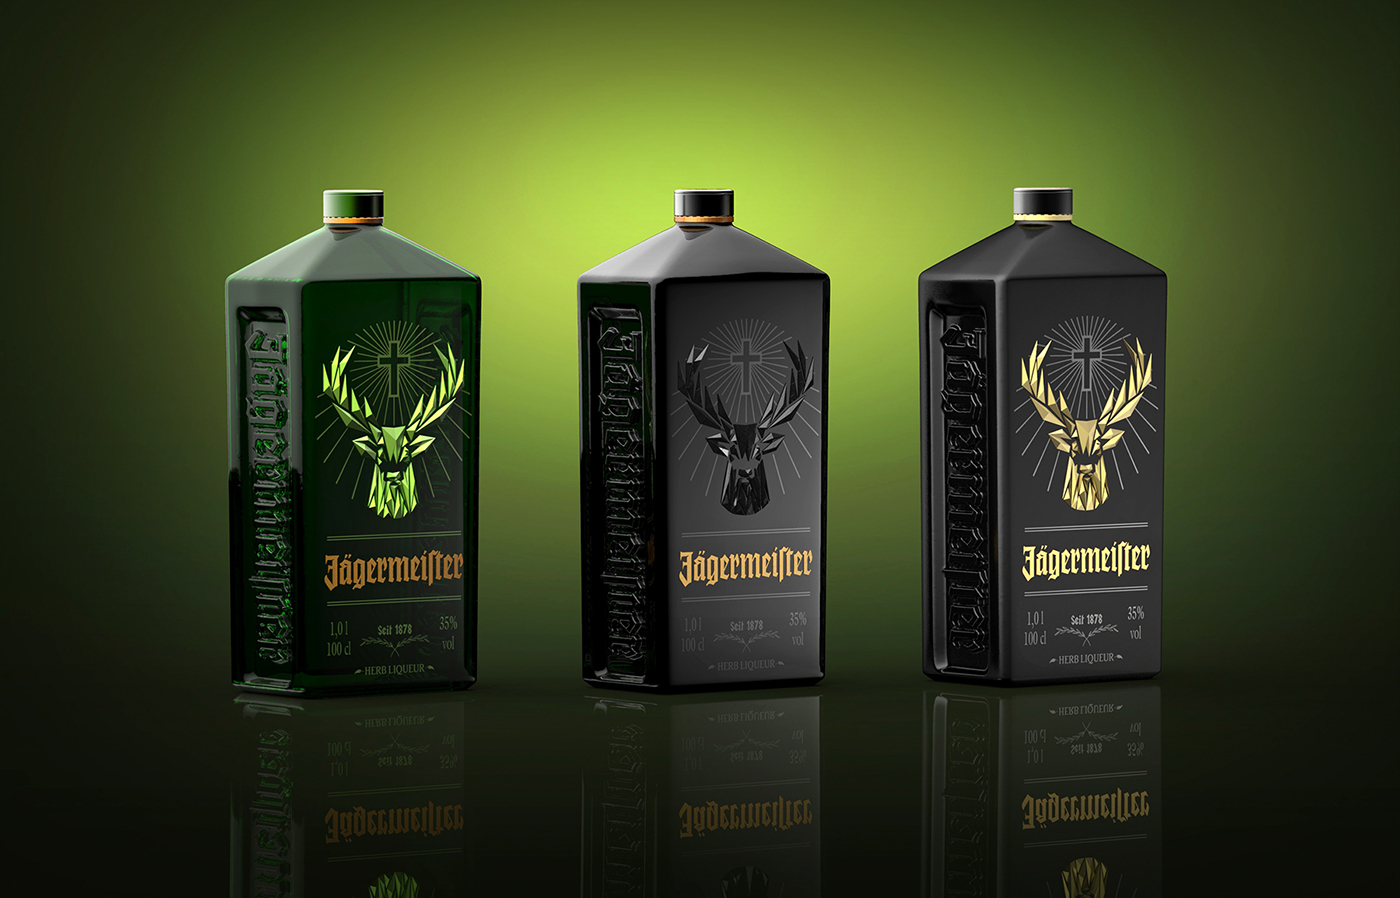 Jagermeister deer lowpoly bottle concept productdesign tomajestic famous drink